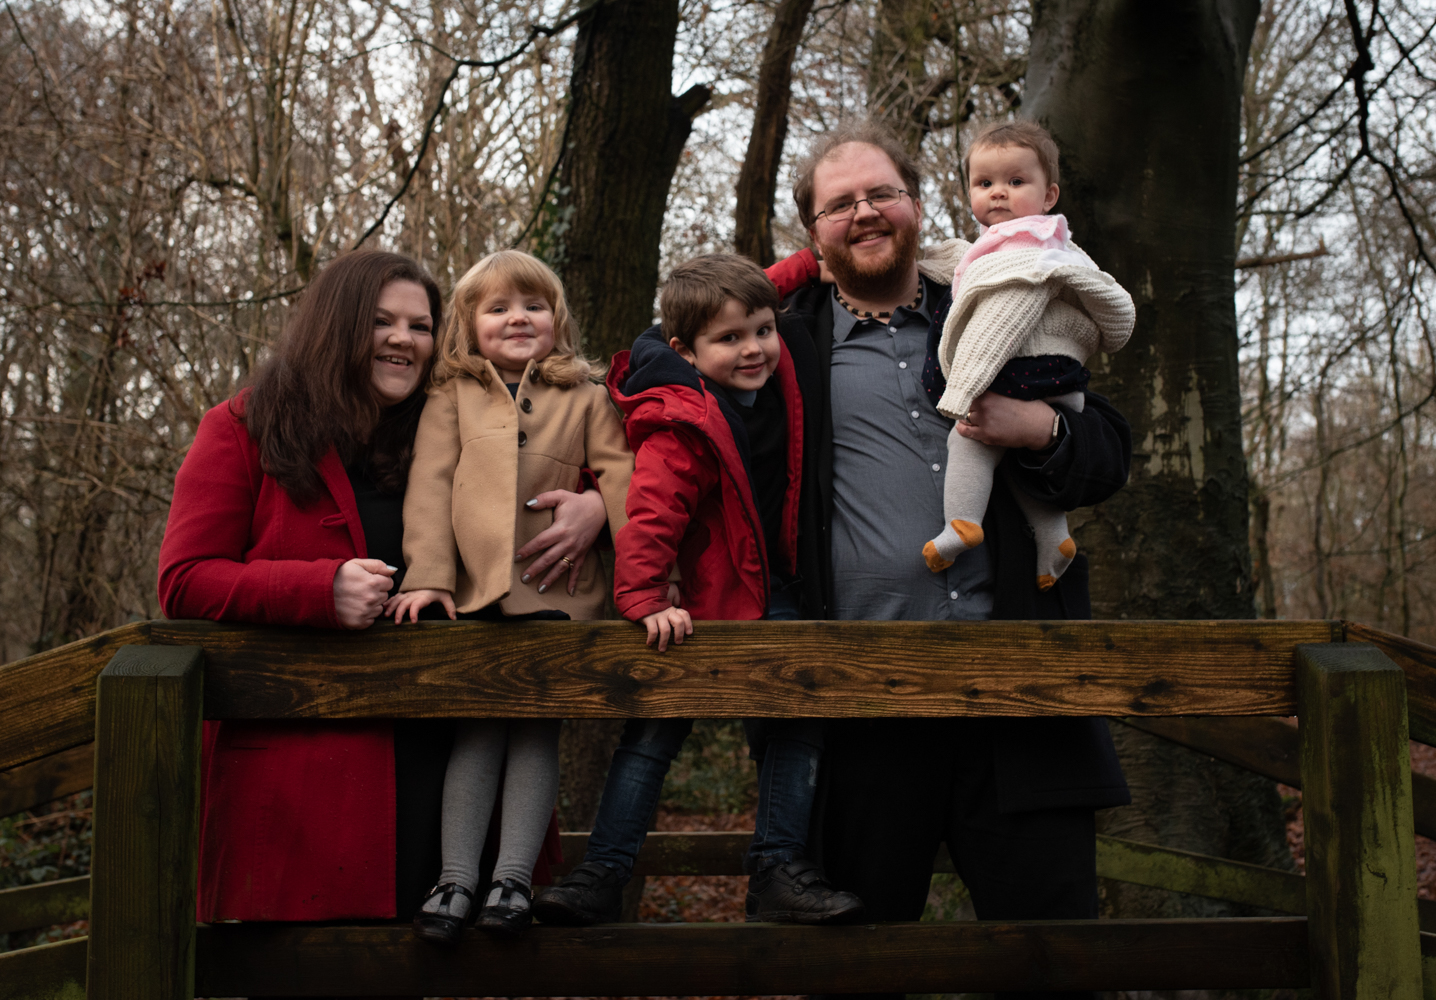  Nice family group photograph in the woods 